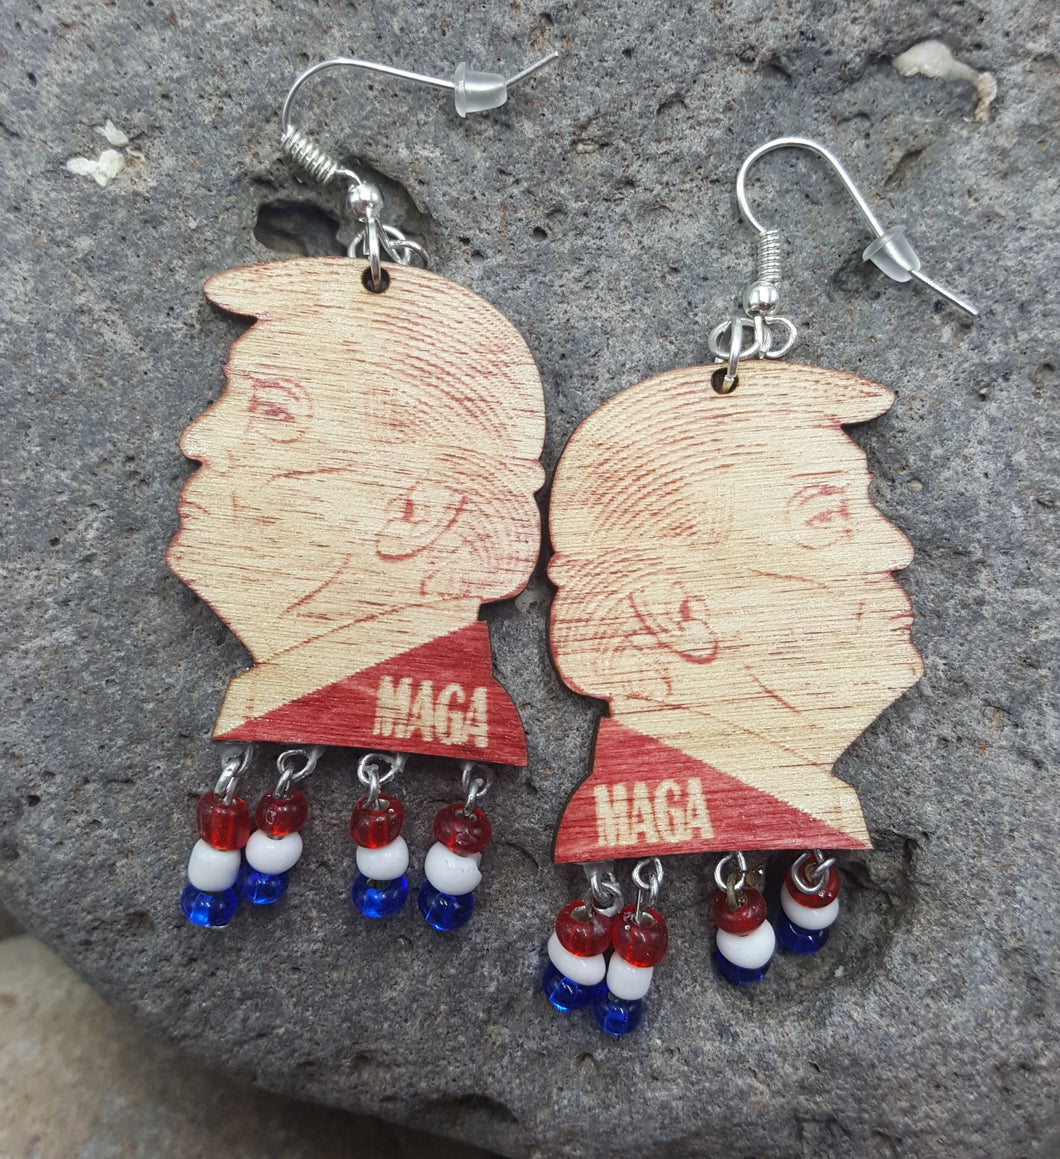 Donald Trump MAGA Earrings with Red, White & Blue Beads Novelty Gift